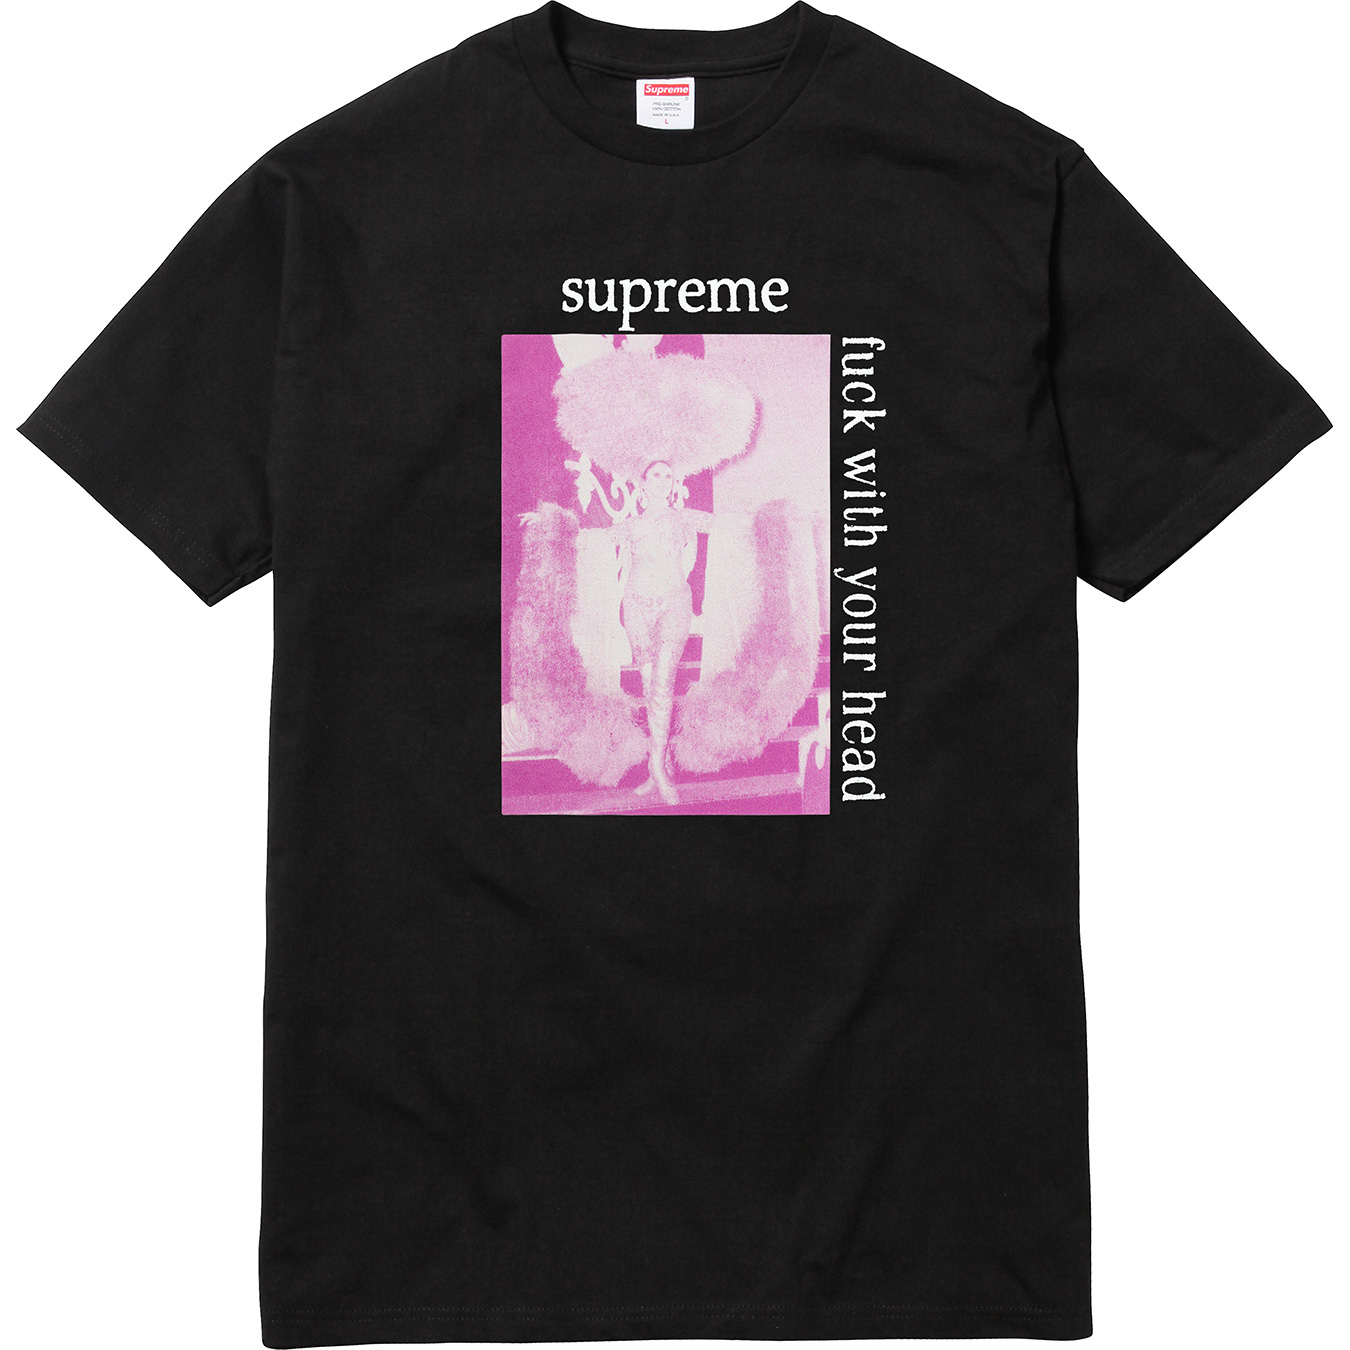 Supreme Fuck With Your Head Tee Black